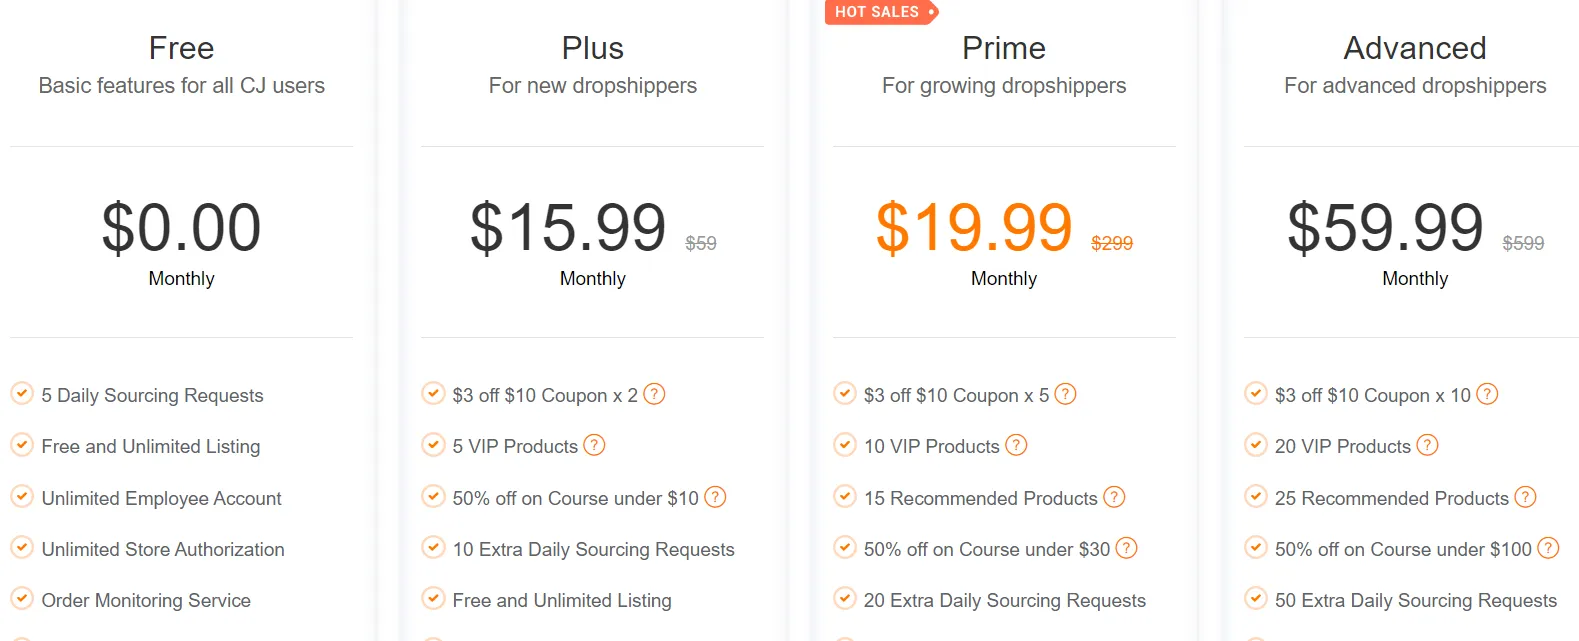 free shopify apps cjdropshipping pricing